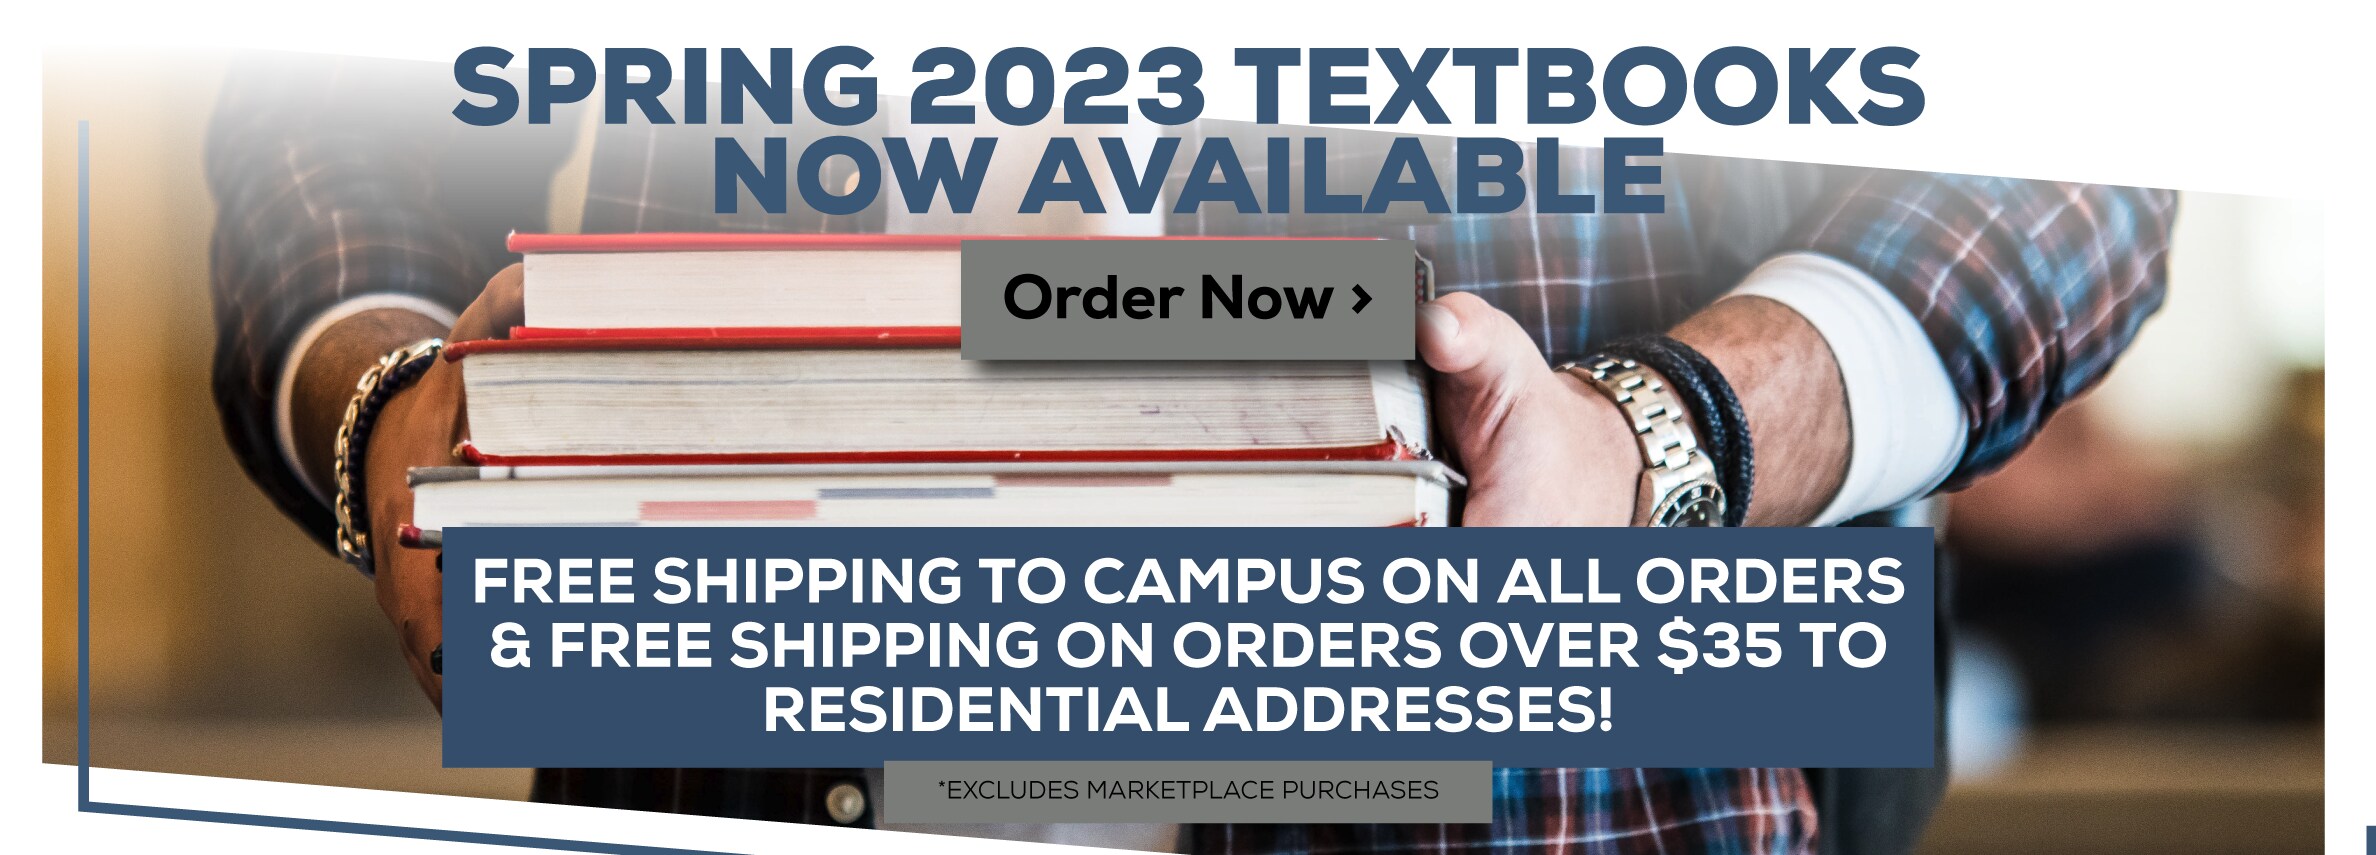 Spring 2023 Textbooks Now Available. Free shipping to campus on all orders & free shipping on orders over $35 to residential addresses!* *Excludes Marketplace Purchases Order Now.